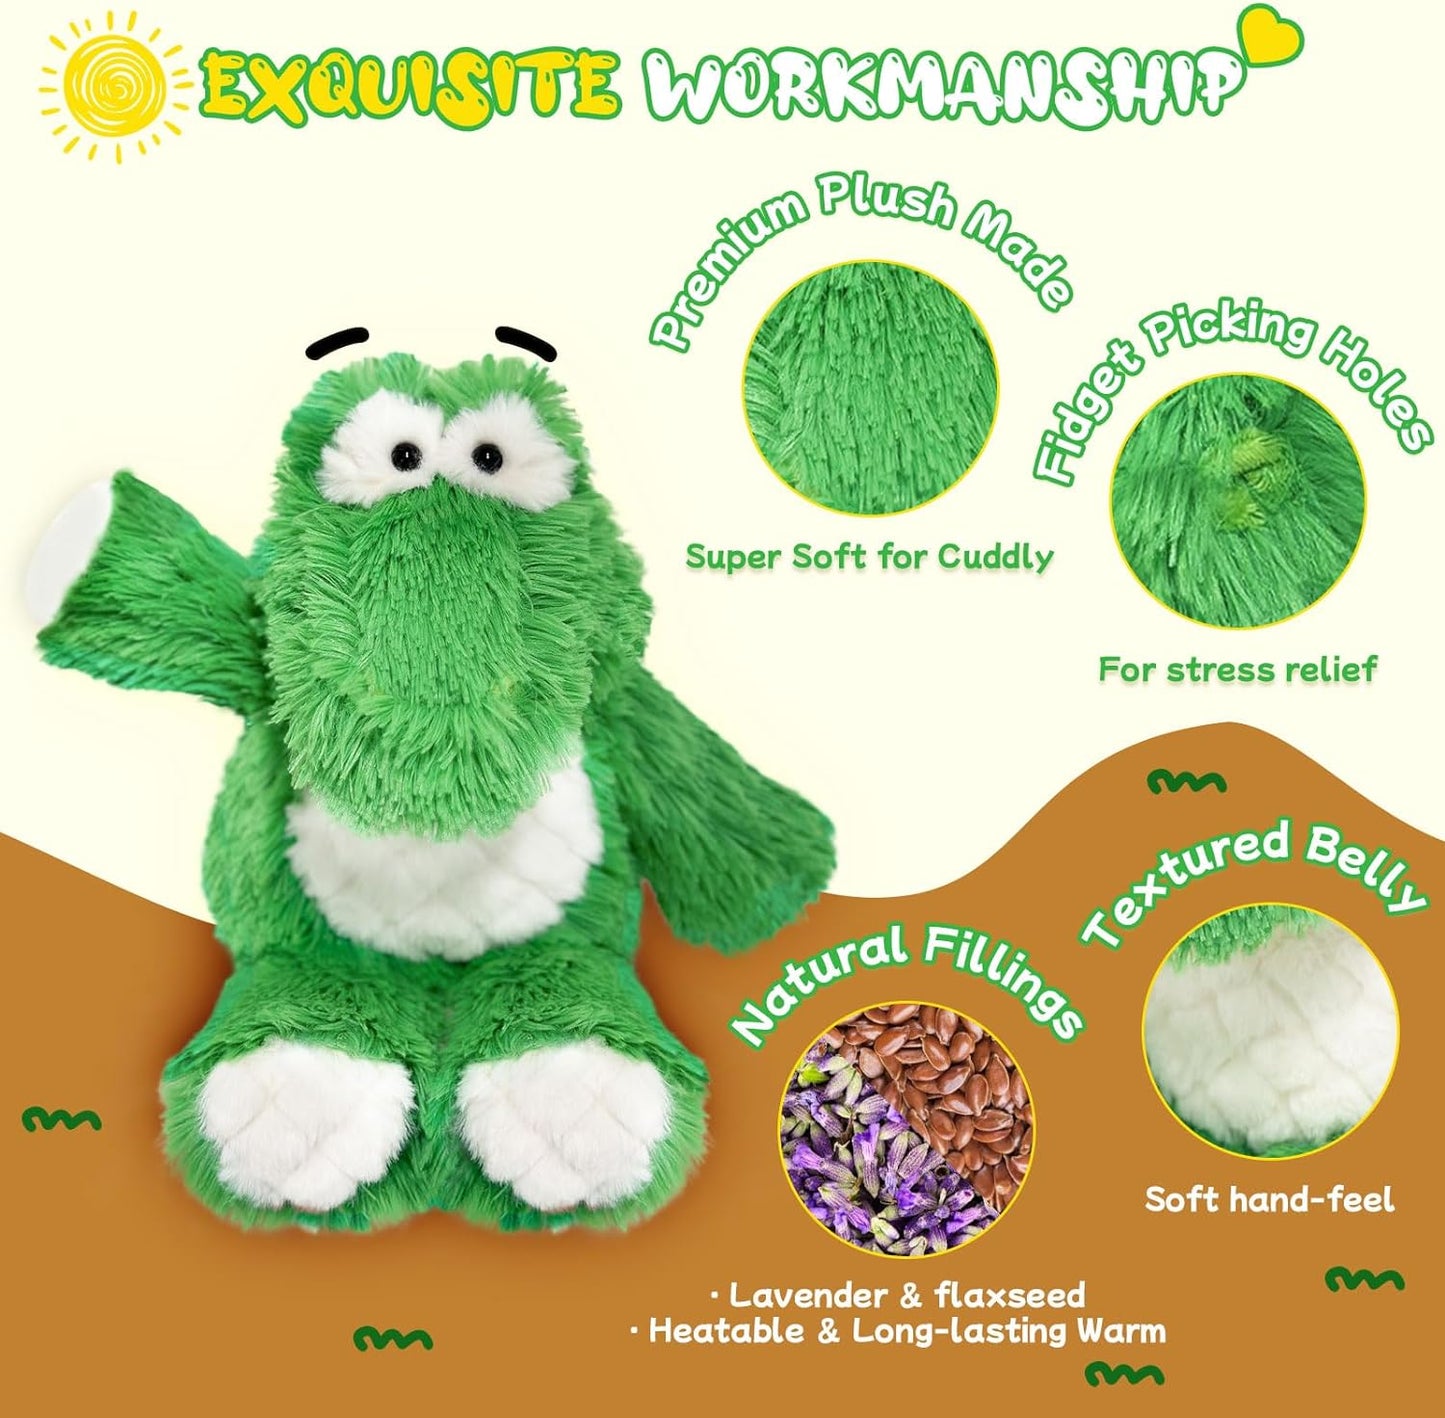 SuzziPals Warmable Alligator Stuffed Animal, Microwavable Stuffed Animal Heating Pads for Cramps and Pain Relief, Plush Crocodile Toy with Lavender Scent, Alligator Plushies for Anxiety Stress Relief